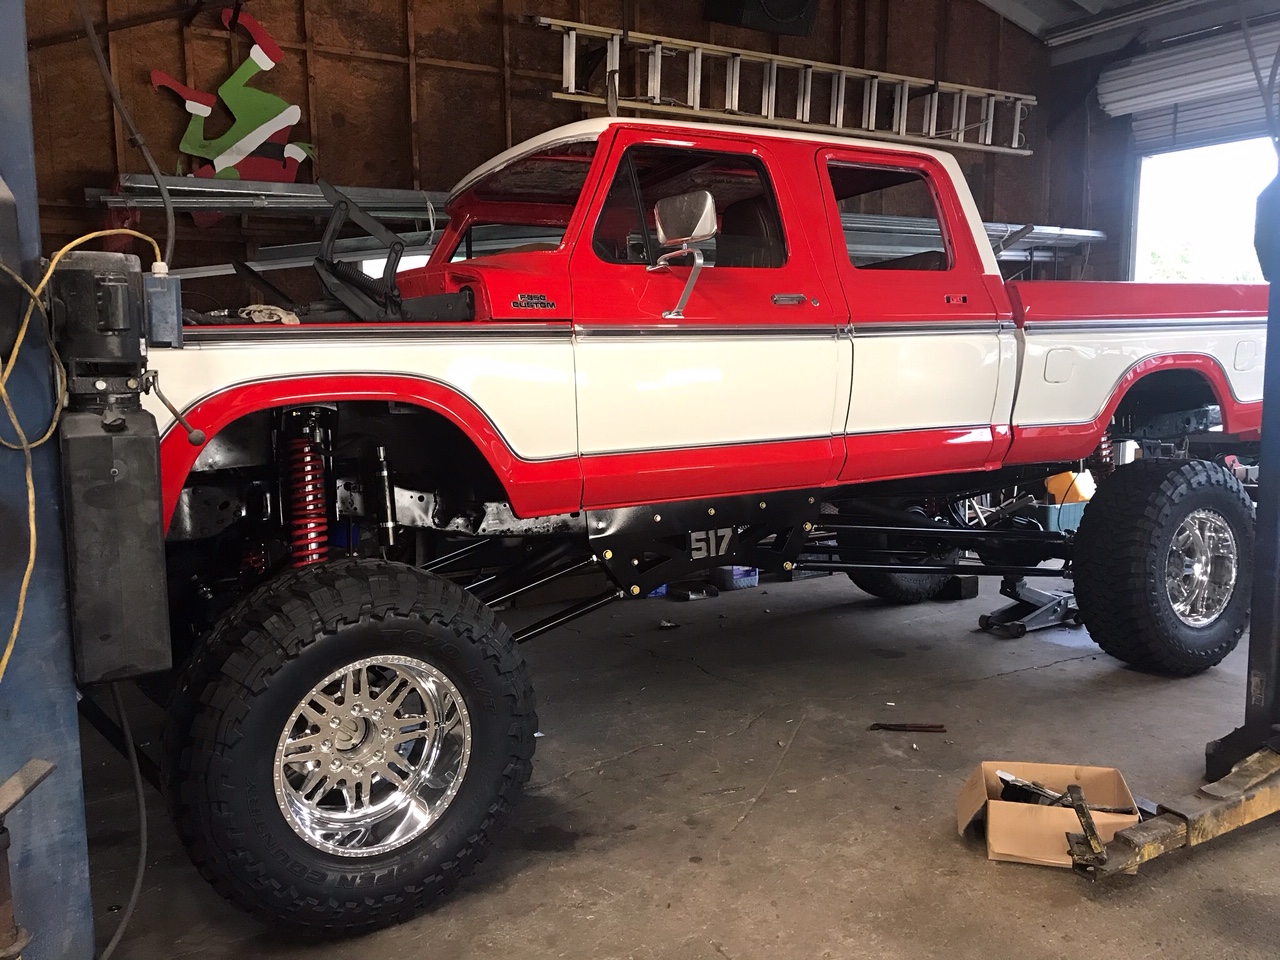 17 Year Old Built His Dream Truck 1977 Ford F250 Crew Cab 7.3L 7.jpeg